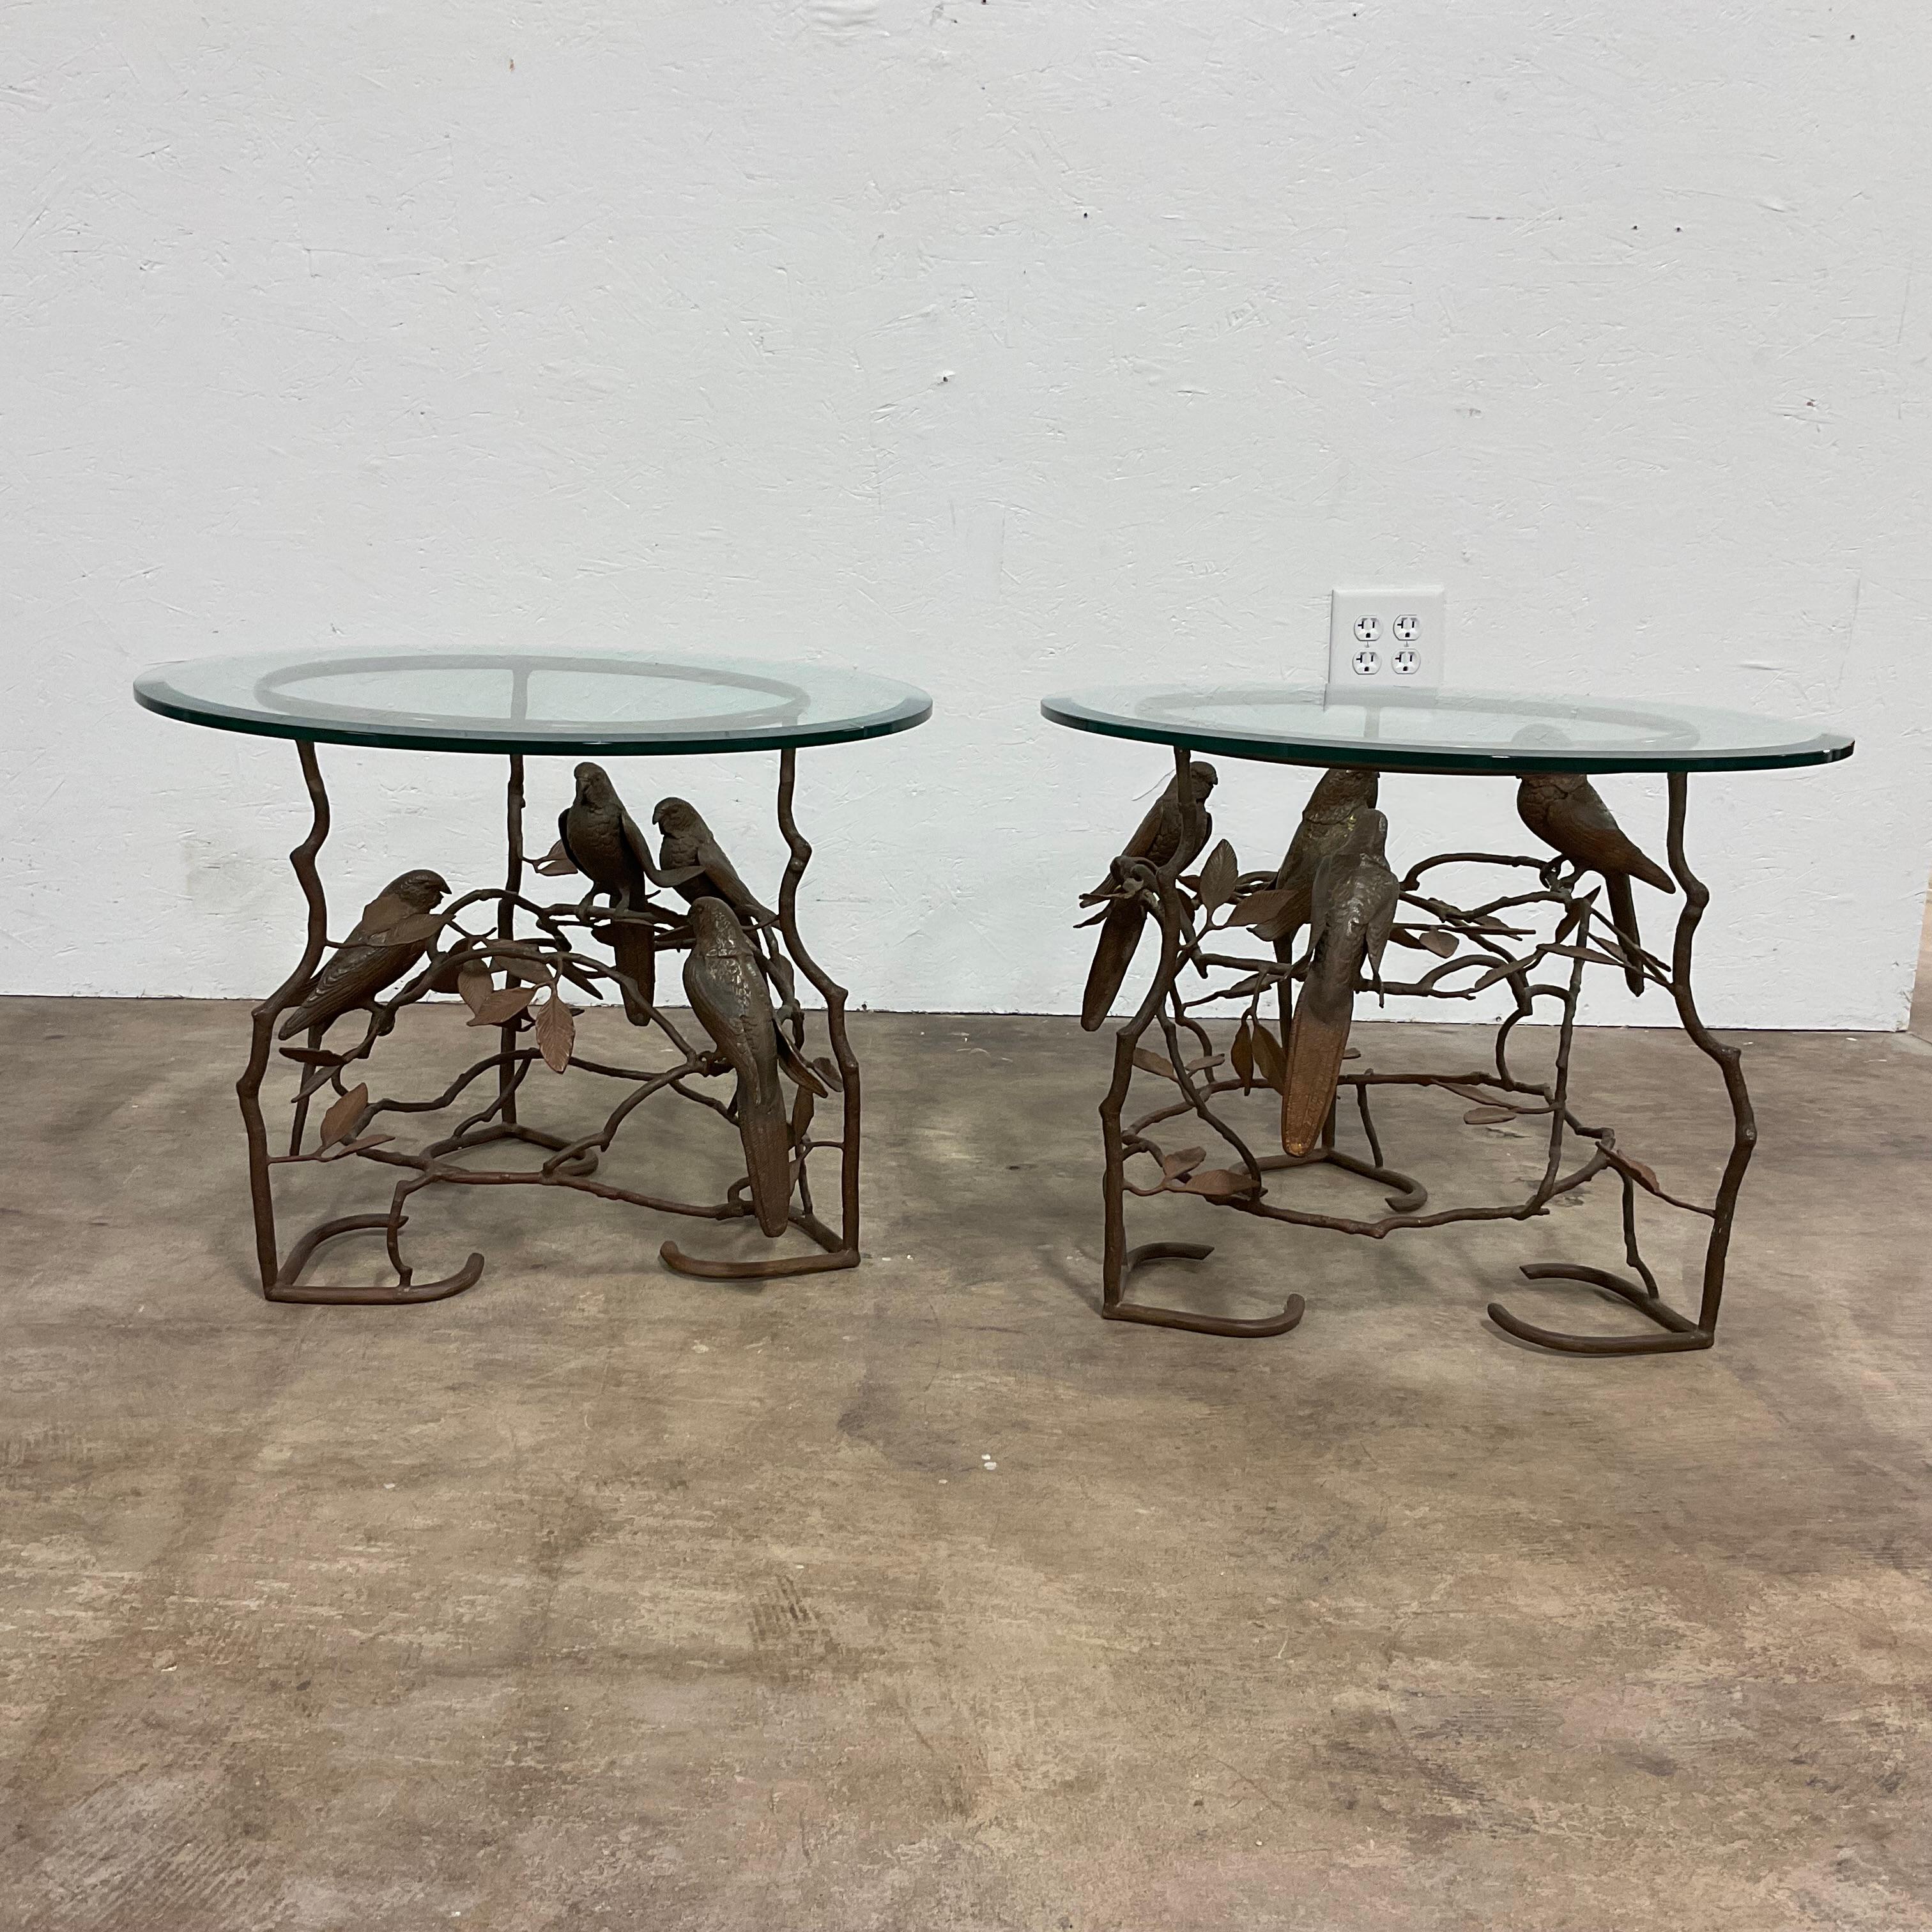 Mexican Mid Century Brass Tables in the style of Giacometti 1